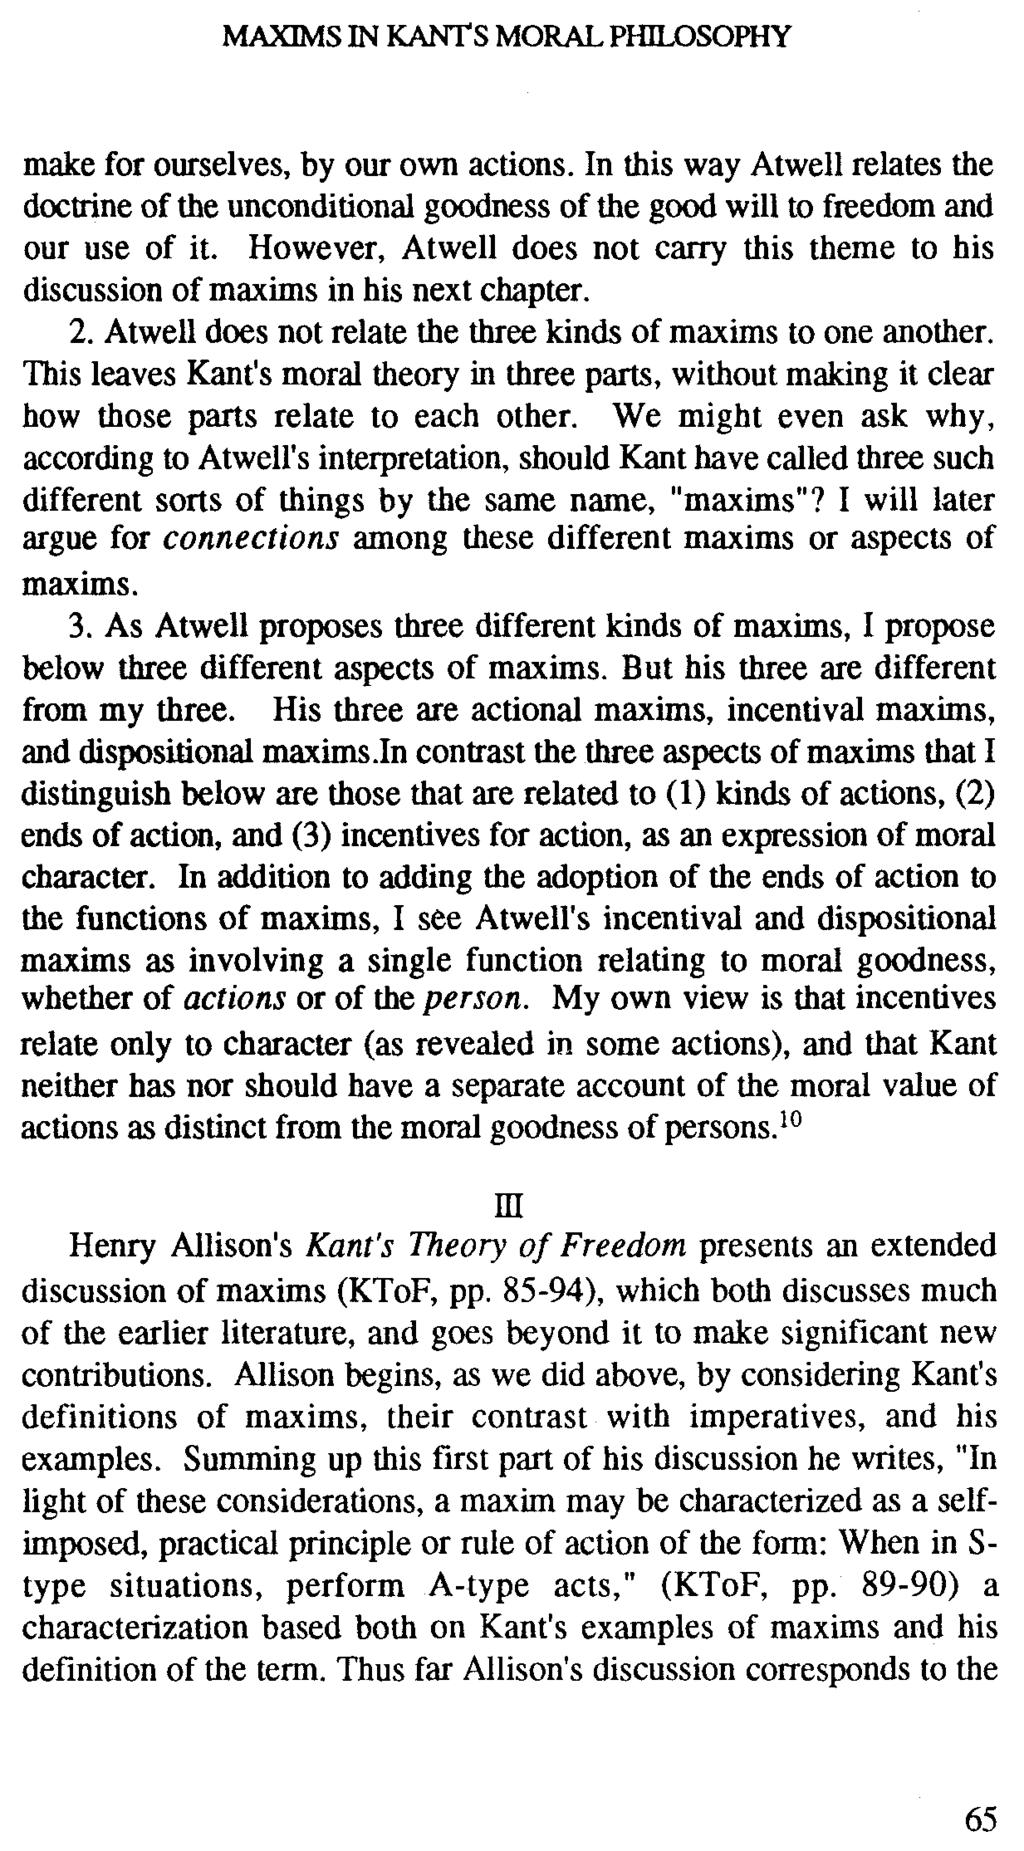 MAXIMS IN KANT'S MORAL PHILOSOPHY make for ourselves, by our own actions. In this way Atwell relates the doctrine of the unconditional goodness of the good will to freedom and our use of it.